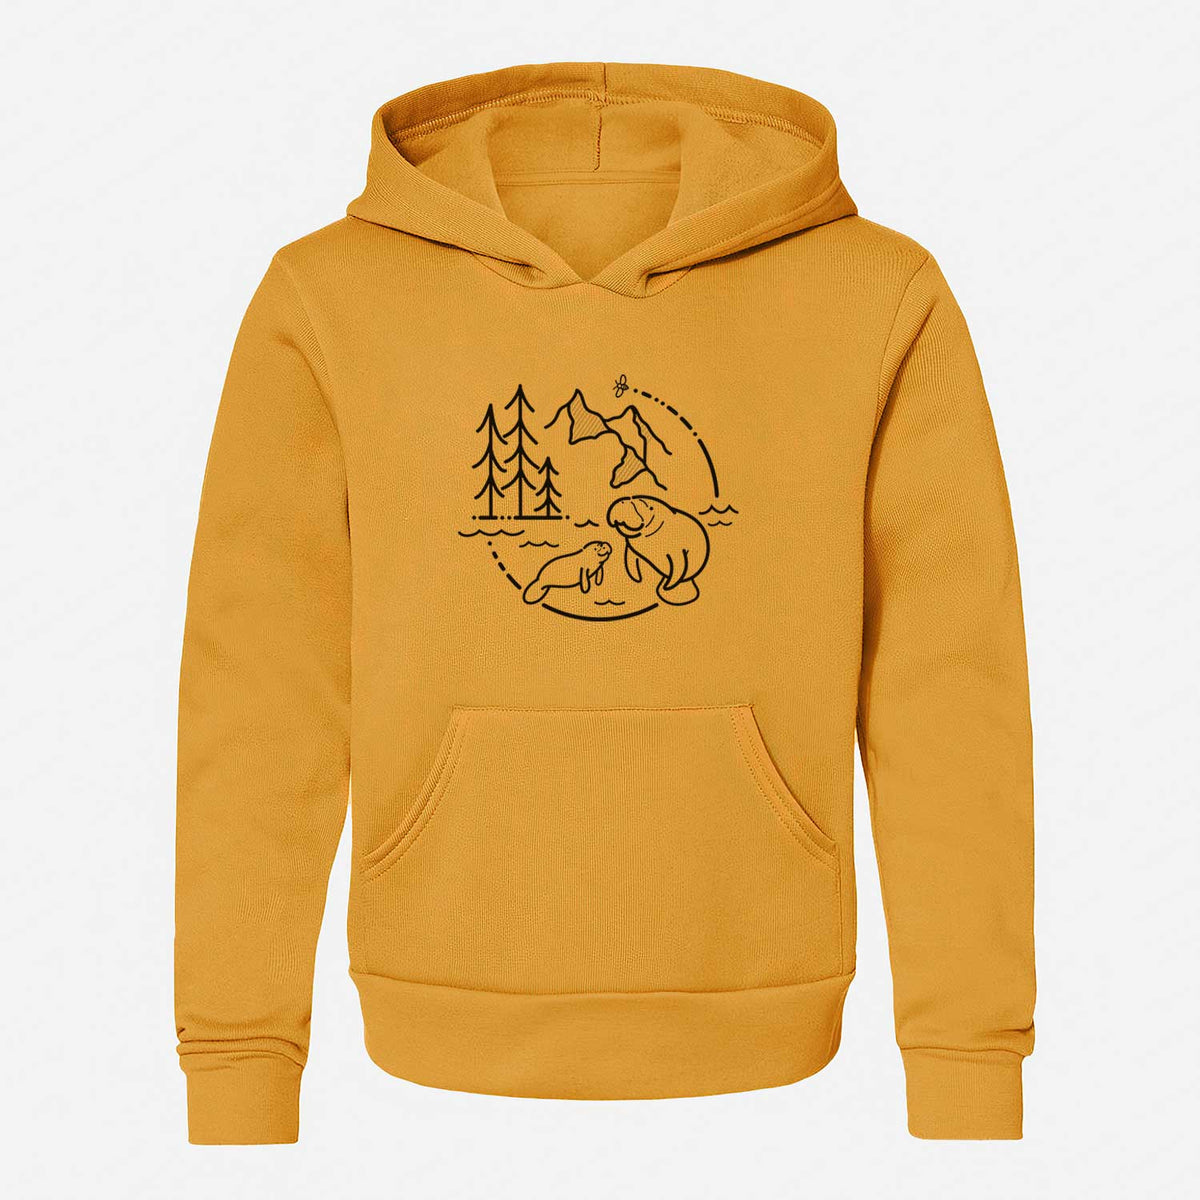 It&#39;s All Connected - Manatee - Youth Hoodie Sweatshirt